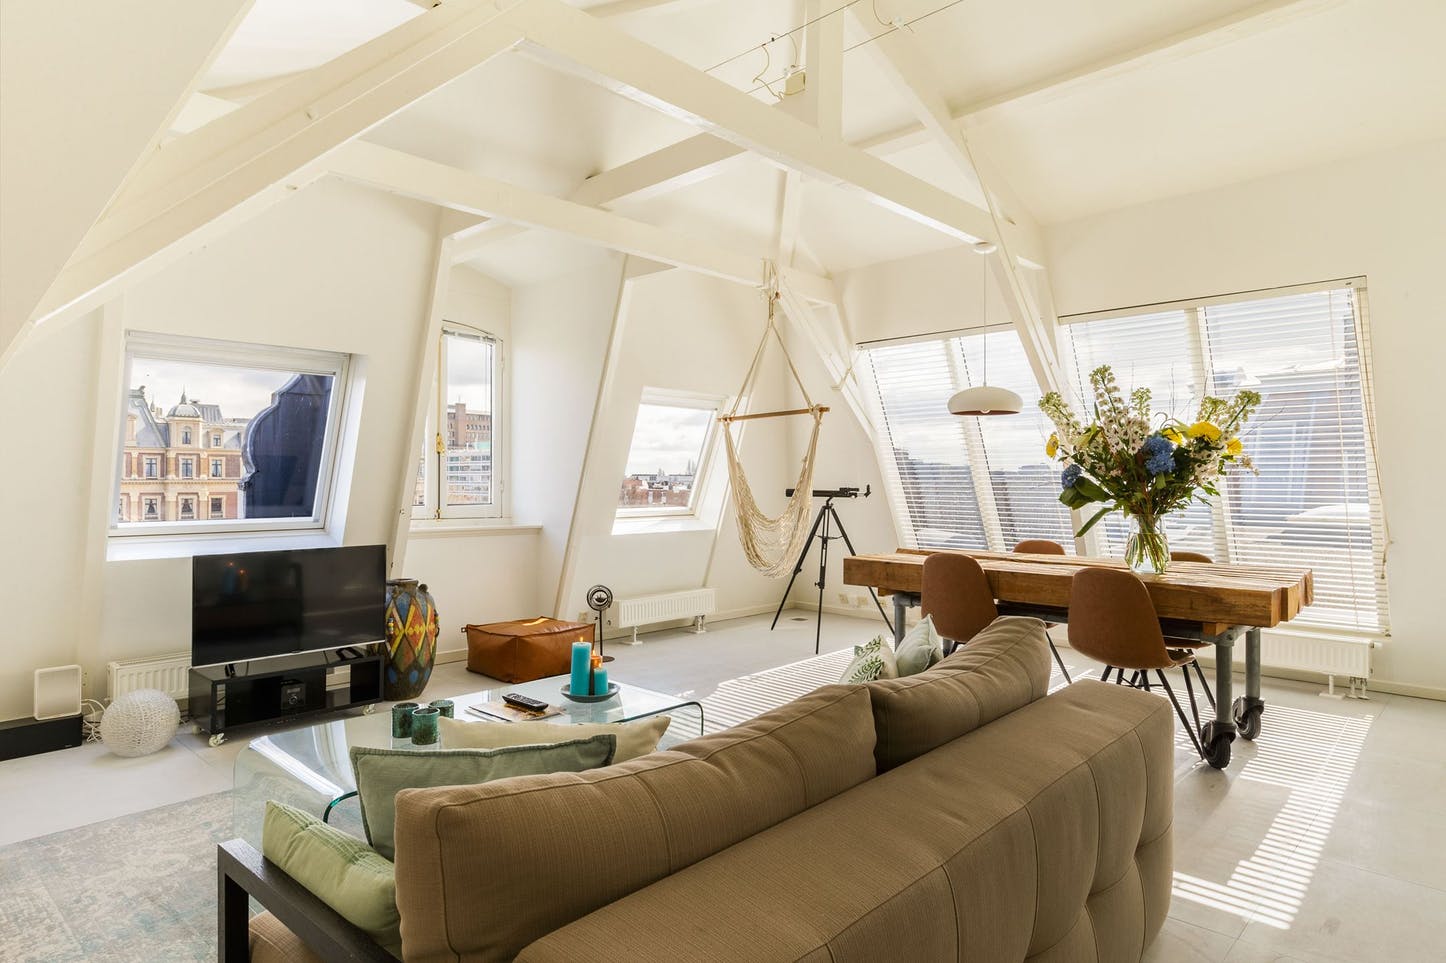 Sarpha - Luxury apartment in Amsterdam for expats